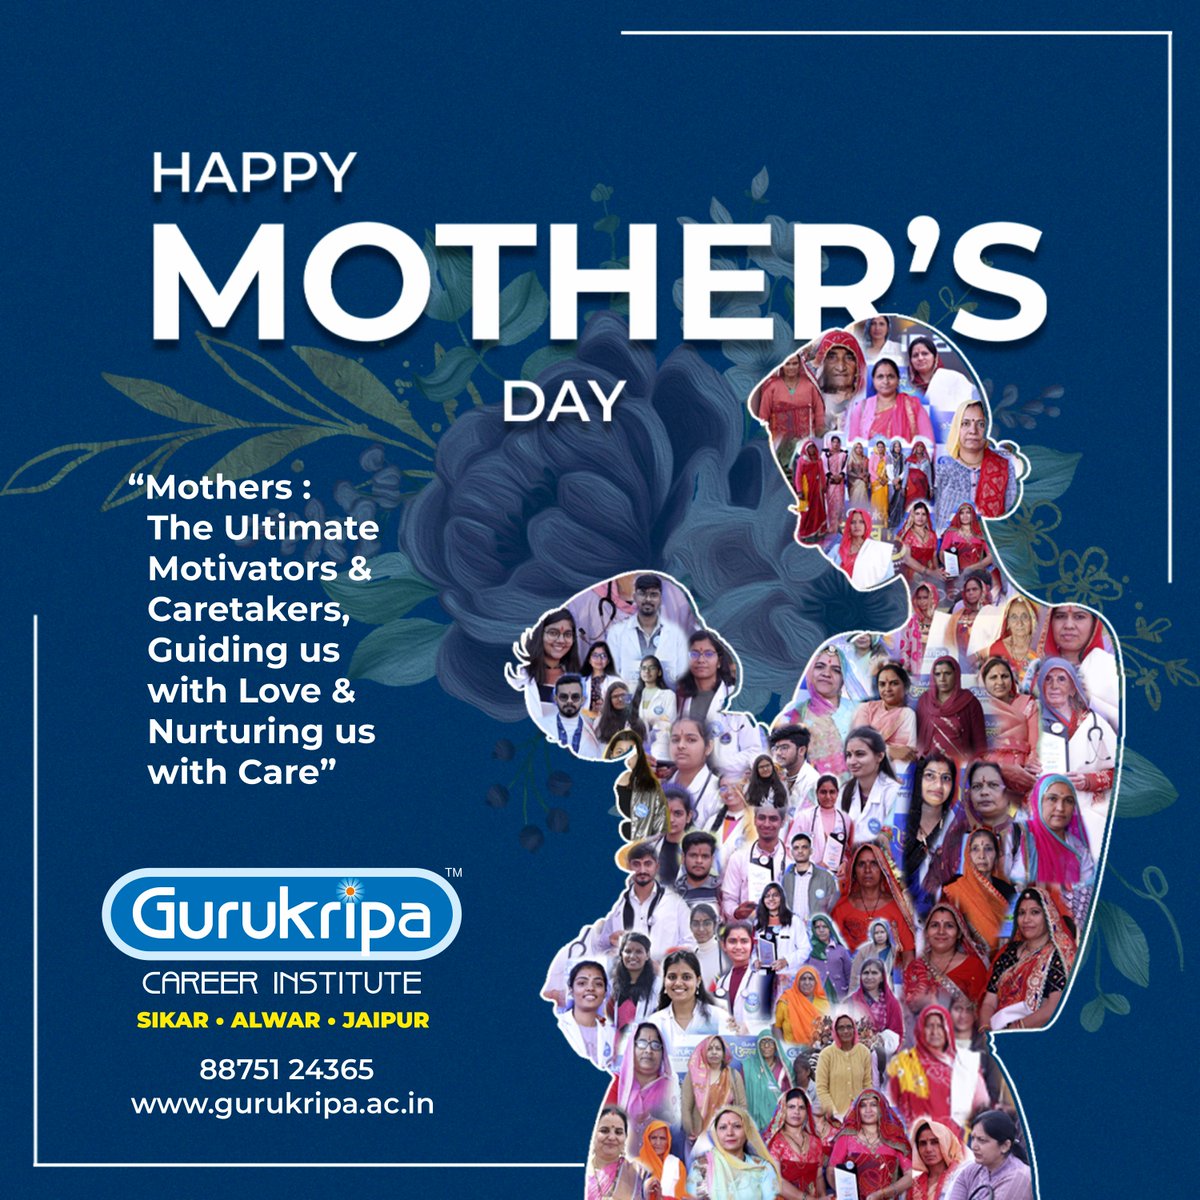 Happy Mother's Day
'Mothers : The Ultimate Motivators and Caretakers, Guiding us with Love and Nurturing us with Care.'
#happymothersday #familybonding #Gurukripa #jee #India #trending #neetinstitute #neetug #gcisikar #jeeinstitute #happymothersday2024